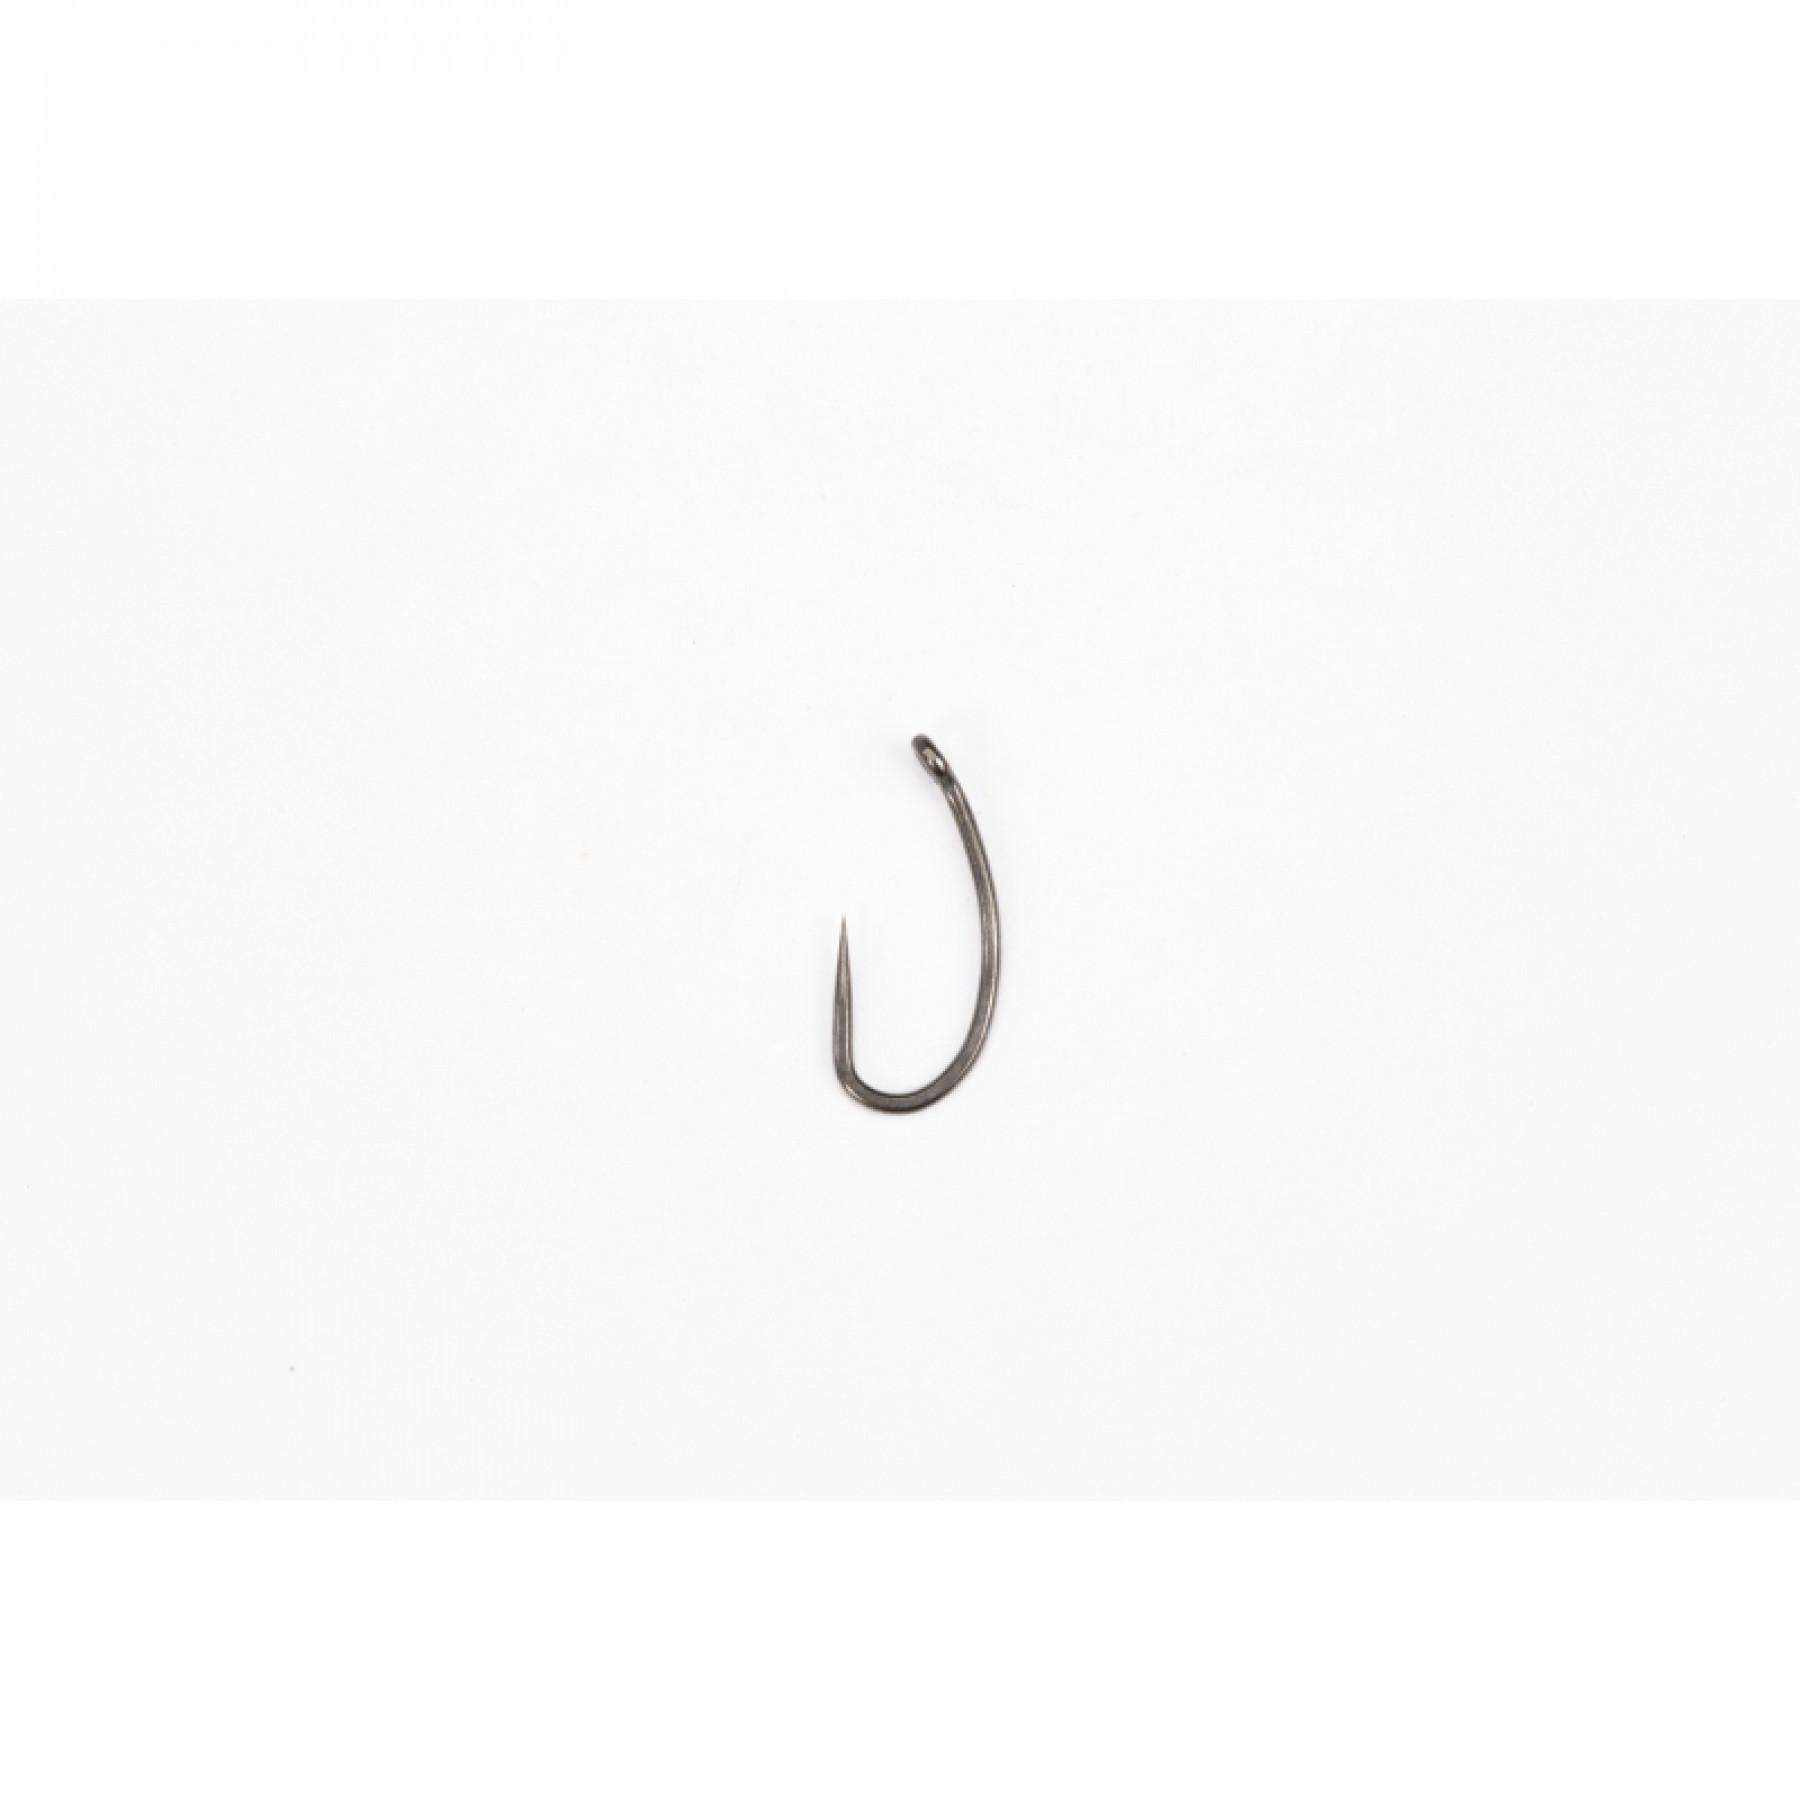 Hook Pinpoint Fang X size 8 Micro Barbed